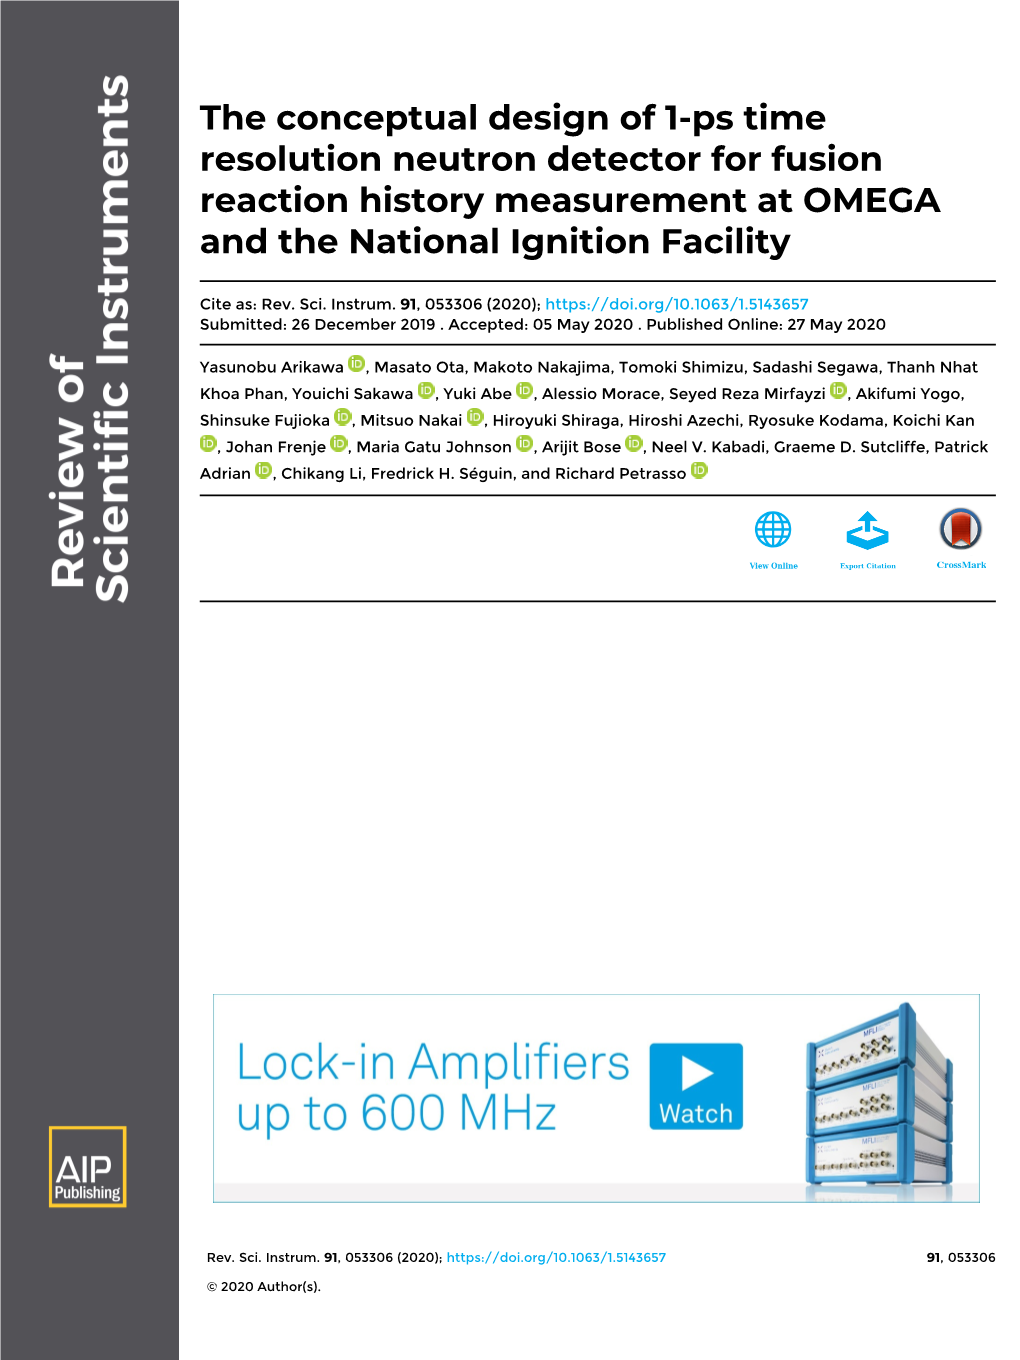 The Conceptual Design of 1-Ps Time Resolution Neutron Detector for Fusion Reaction History Measurement at OMEGA and the National Ignition Facility